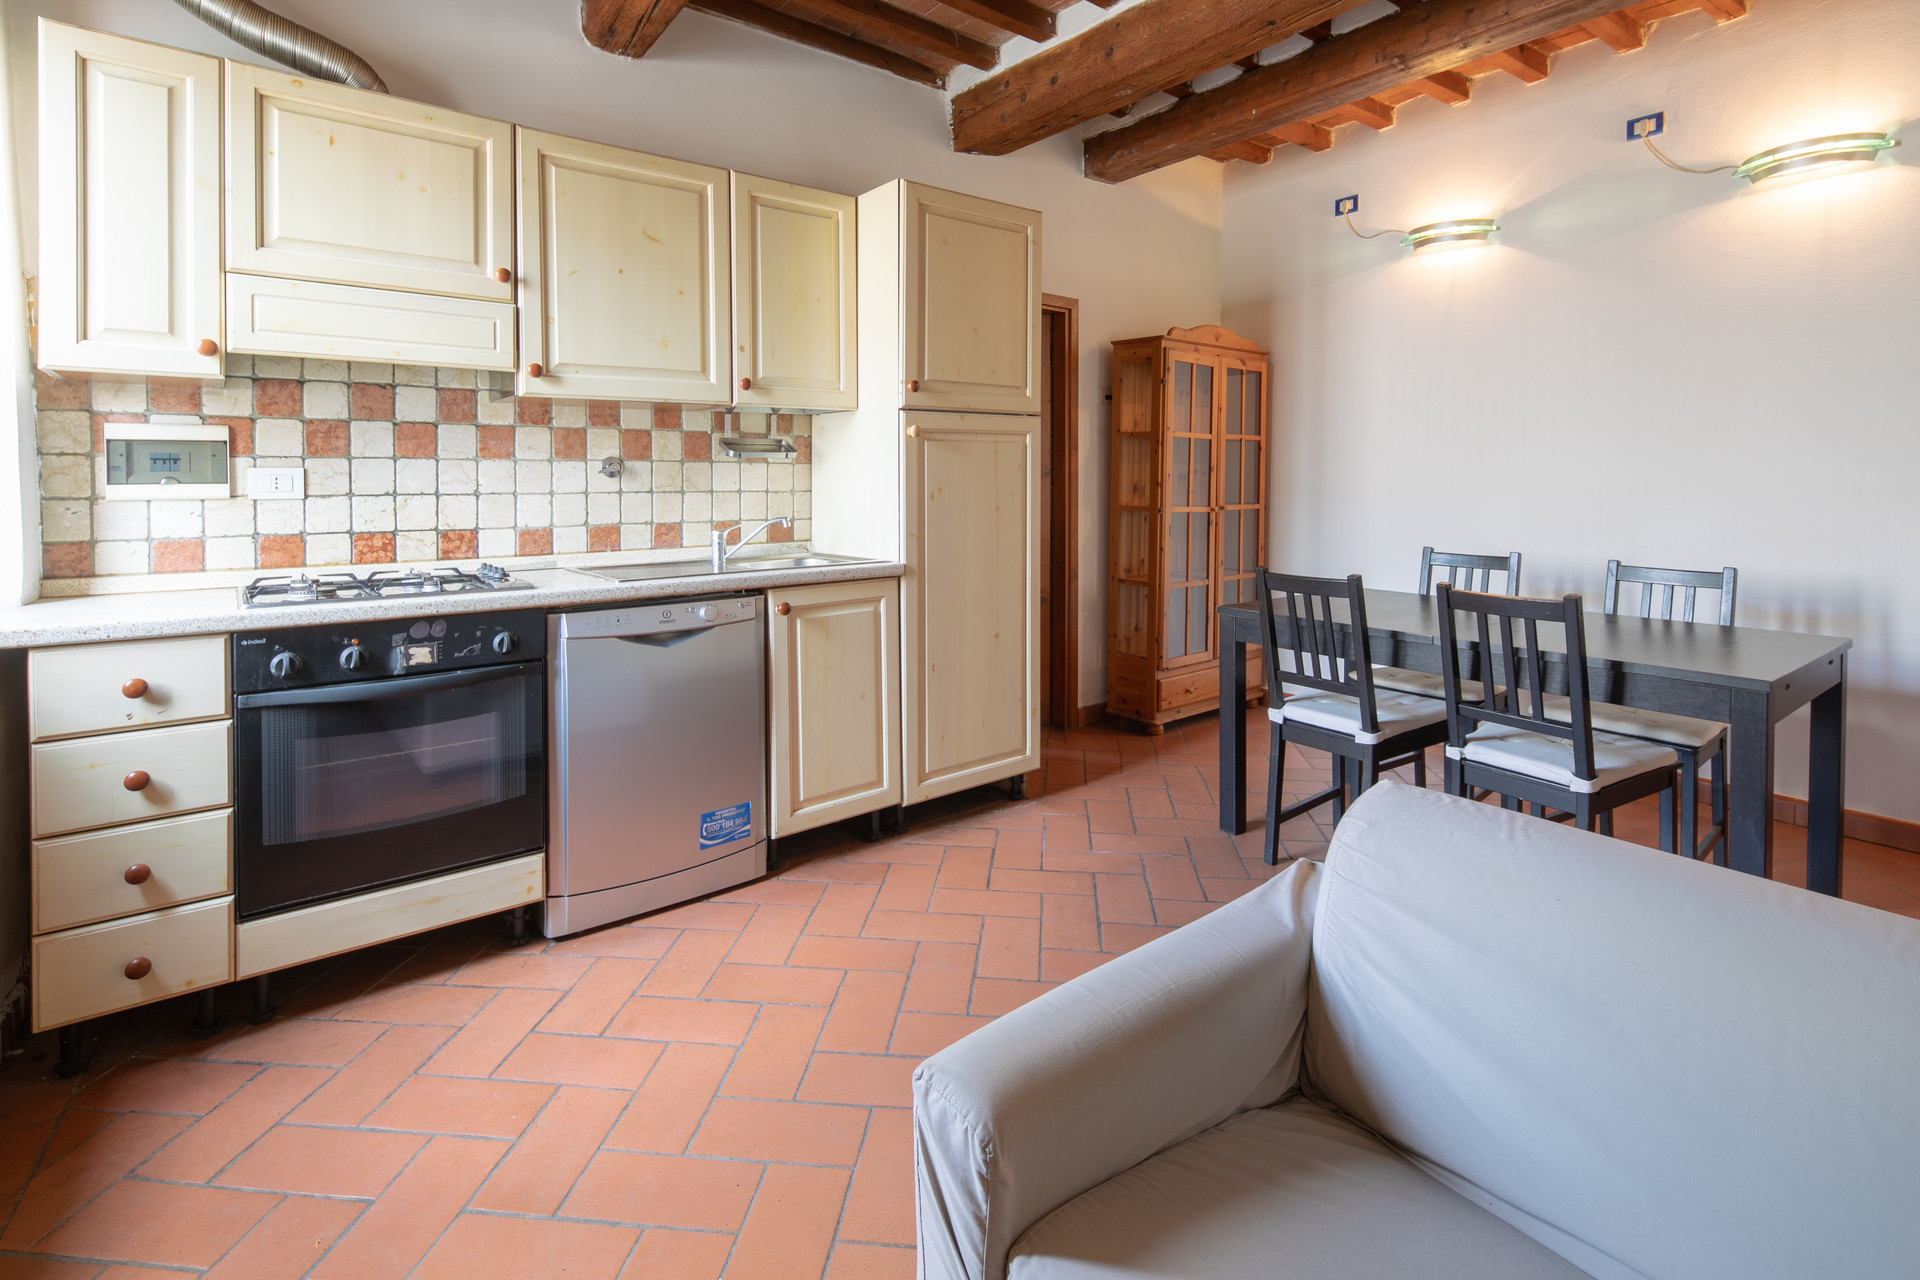 Stunning Rental Apartment For Erasmus Students In Florence